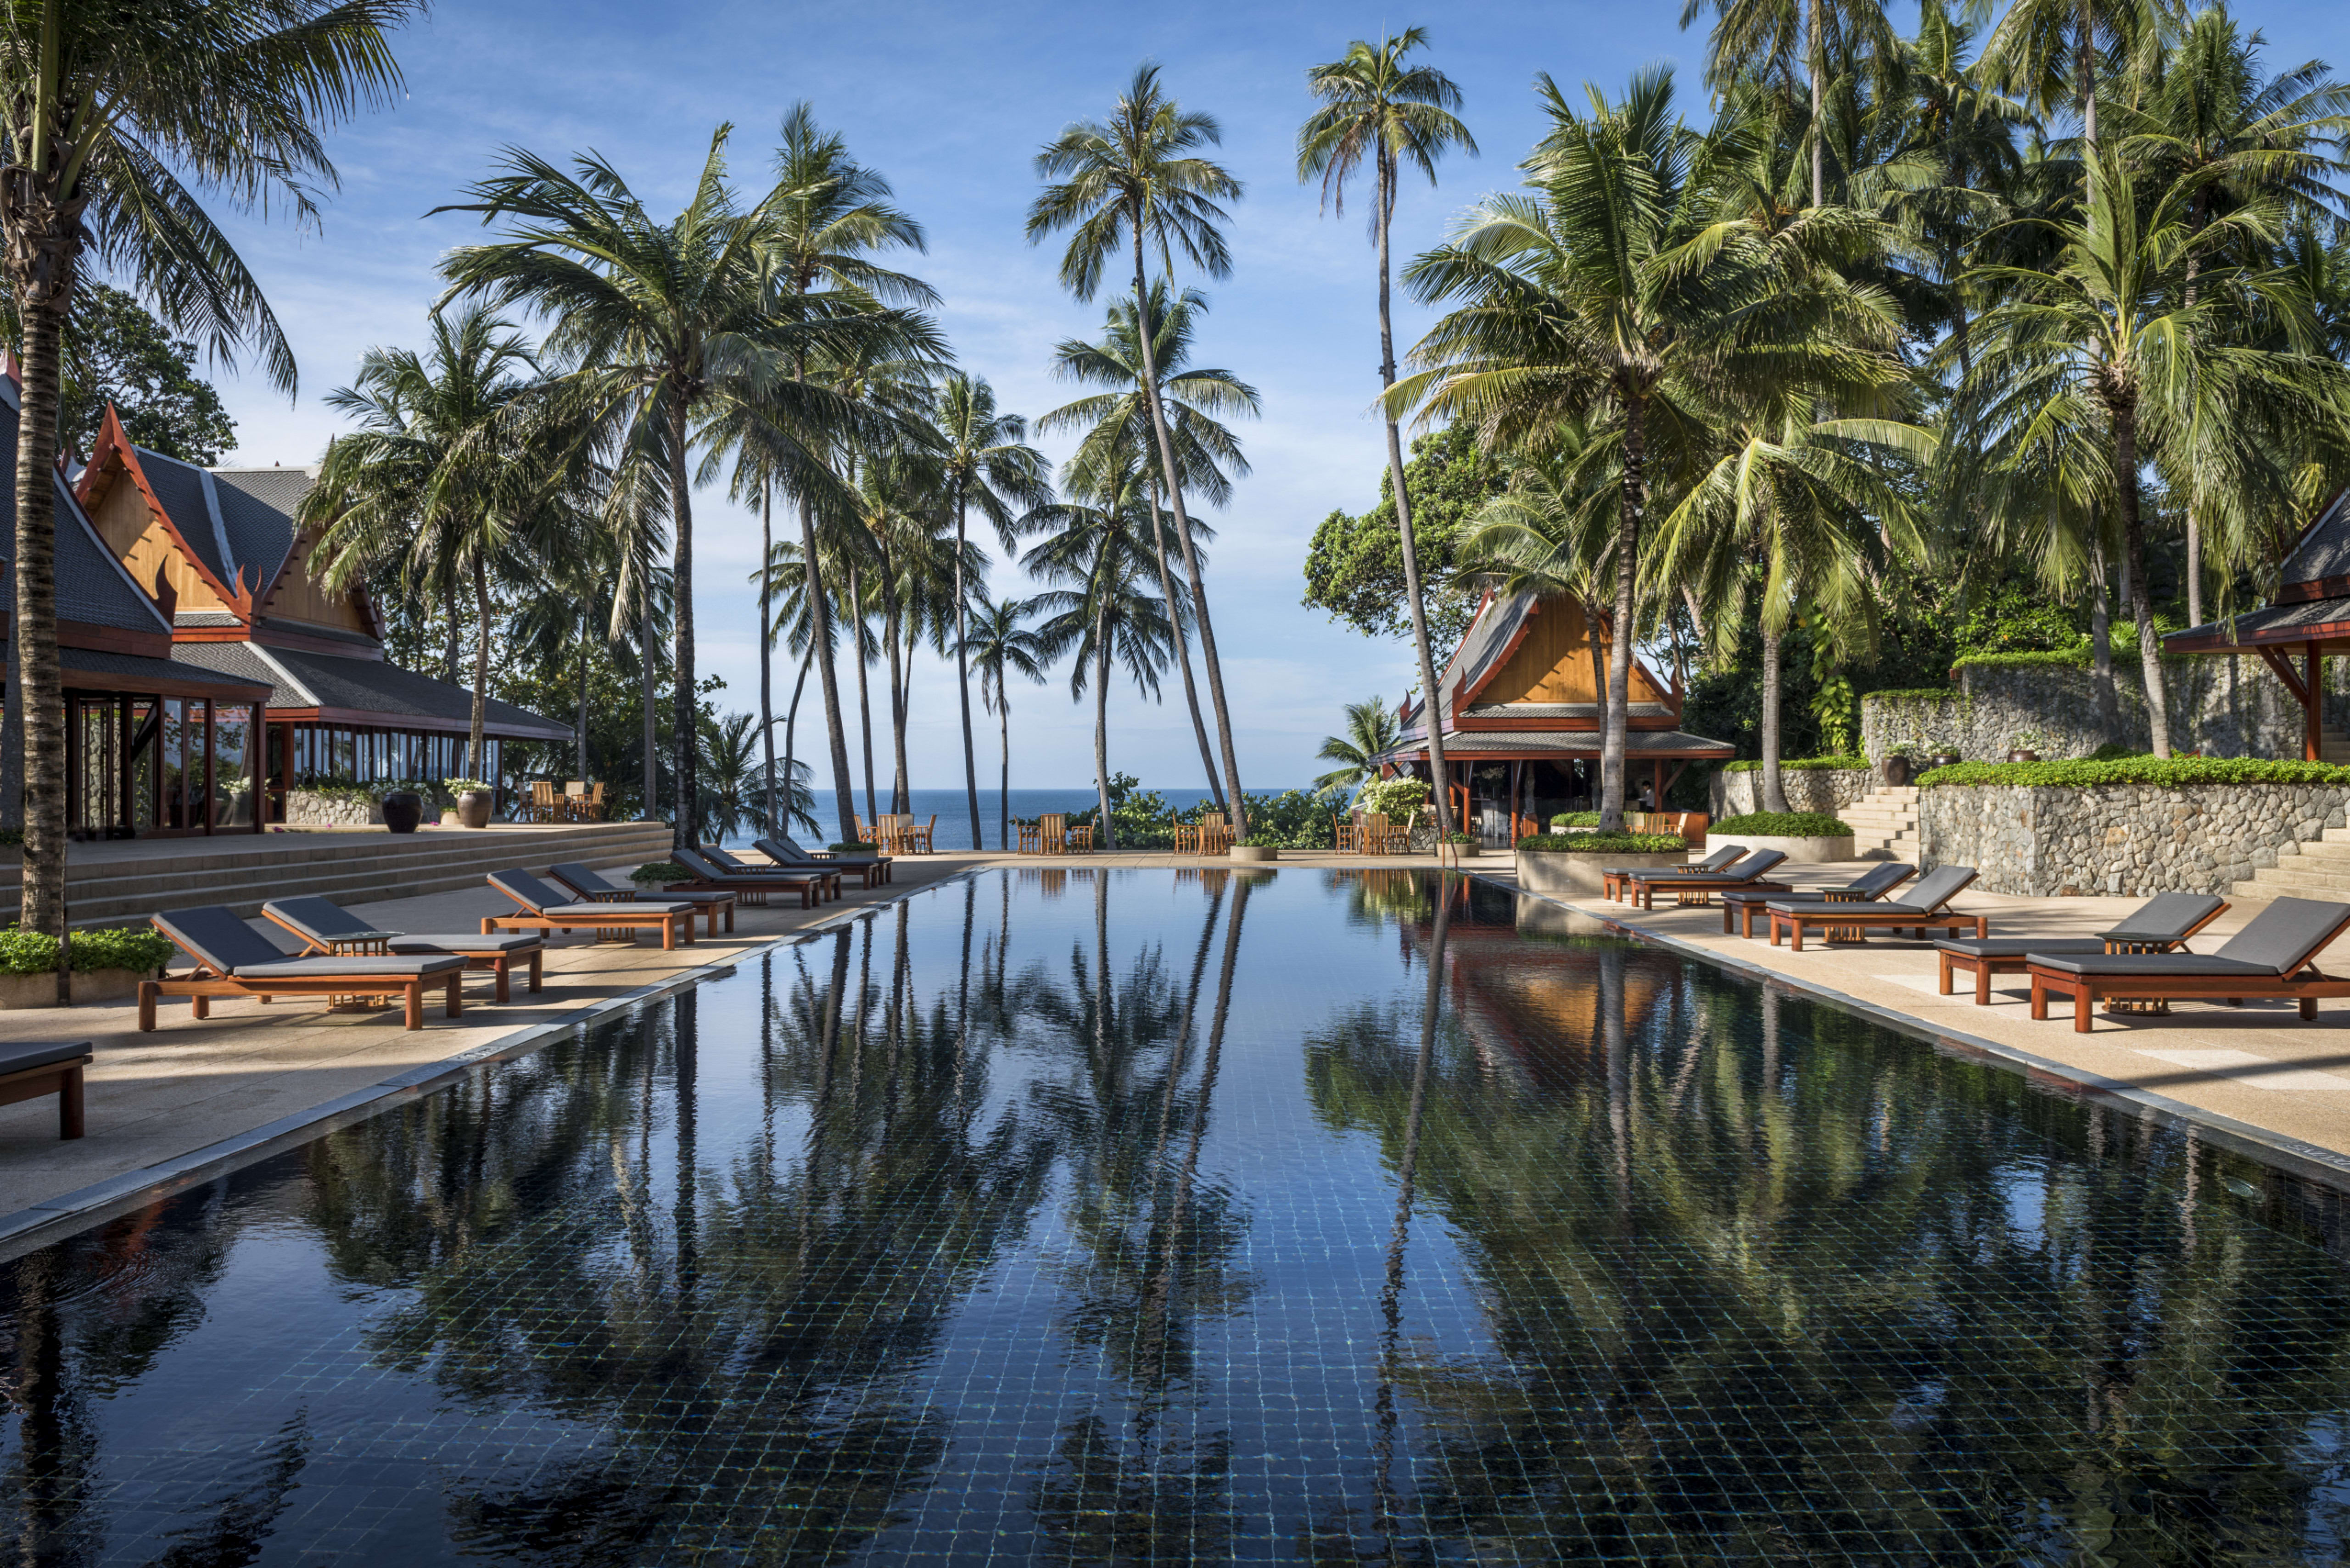 Amanpuri, set among coconut palms, is the flagship property of Aman resorts (Credit/Aman)